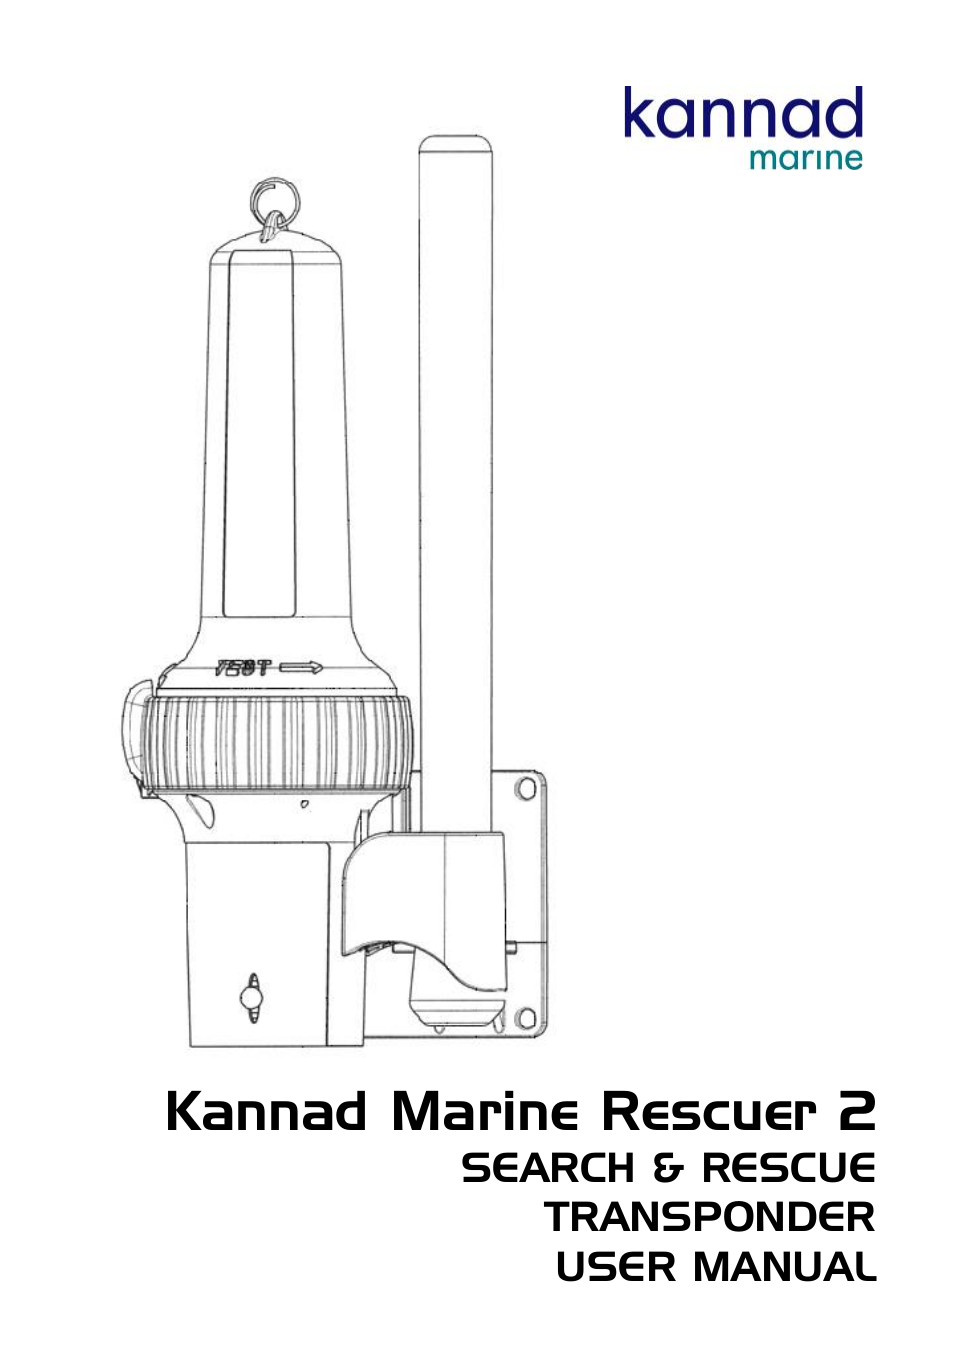 Kannad Marine Rescuer 2 SART User Manual | 22 pages